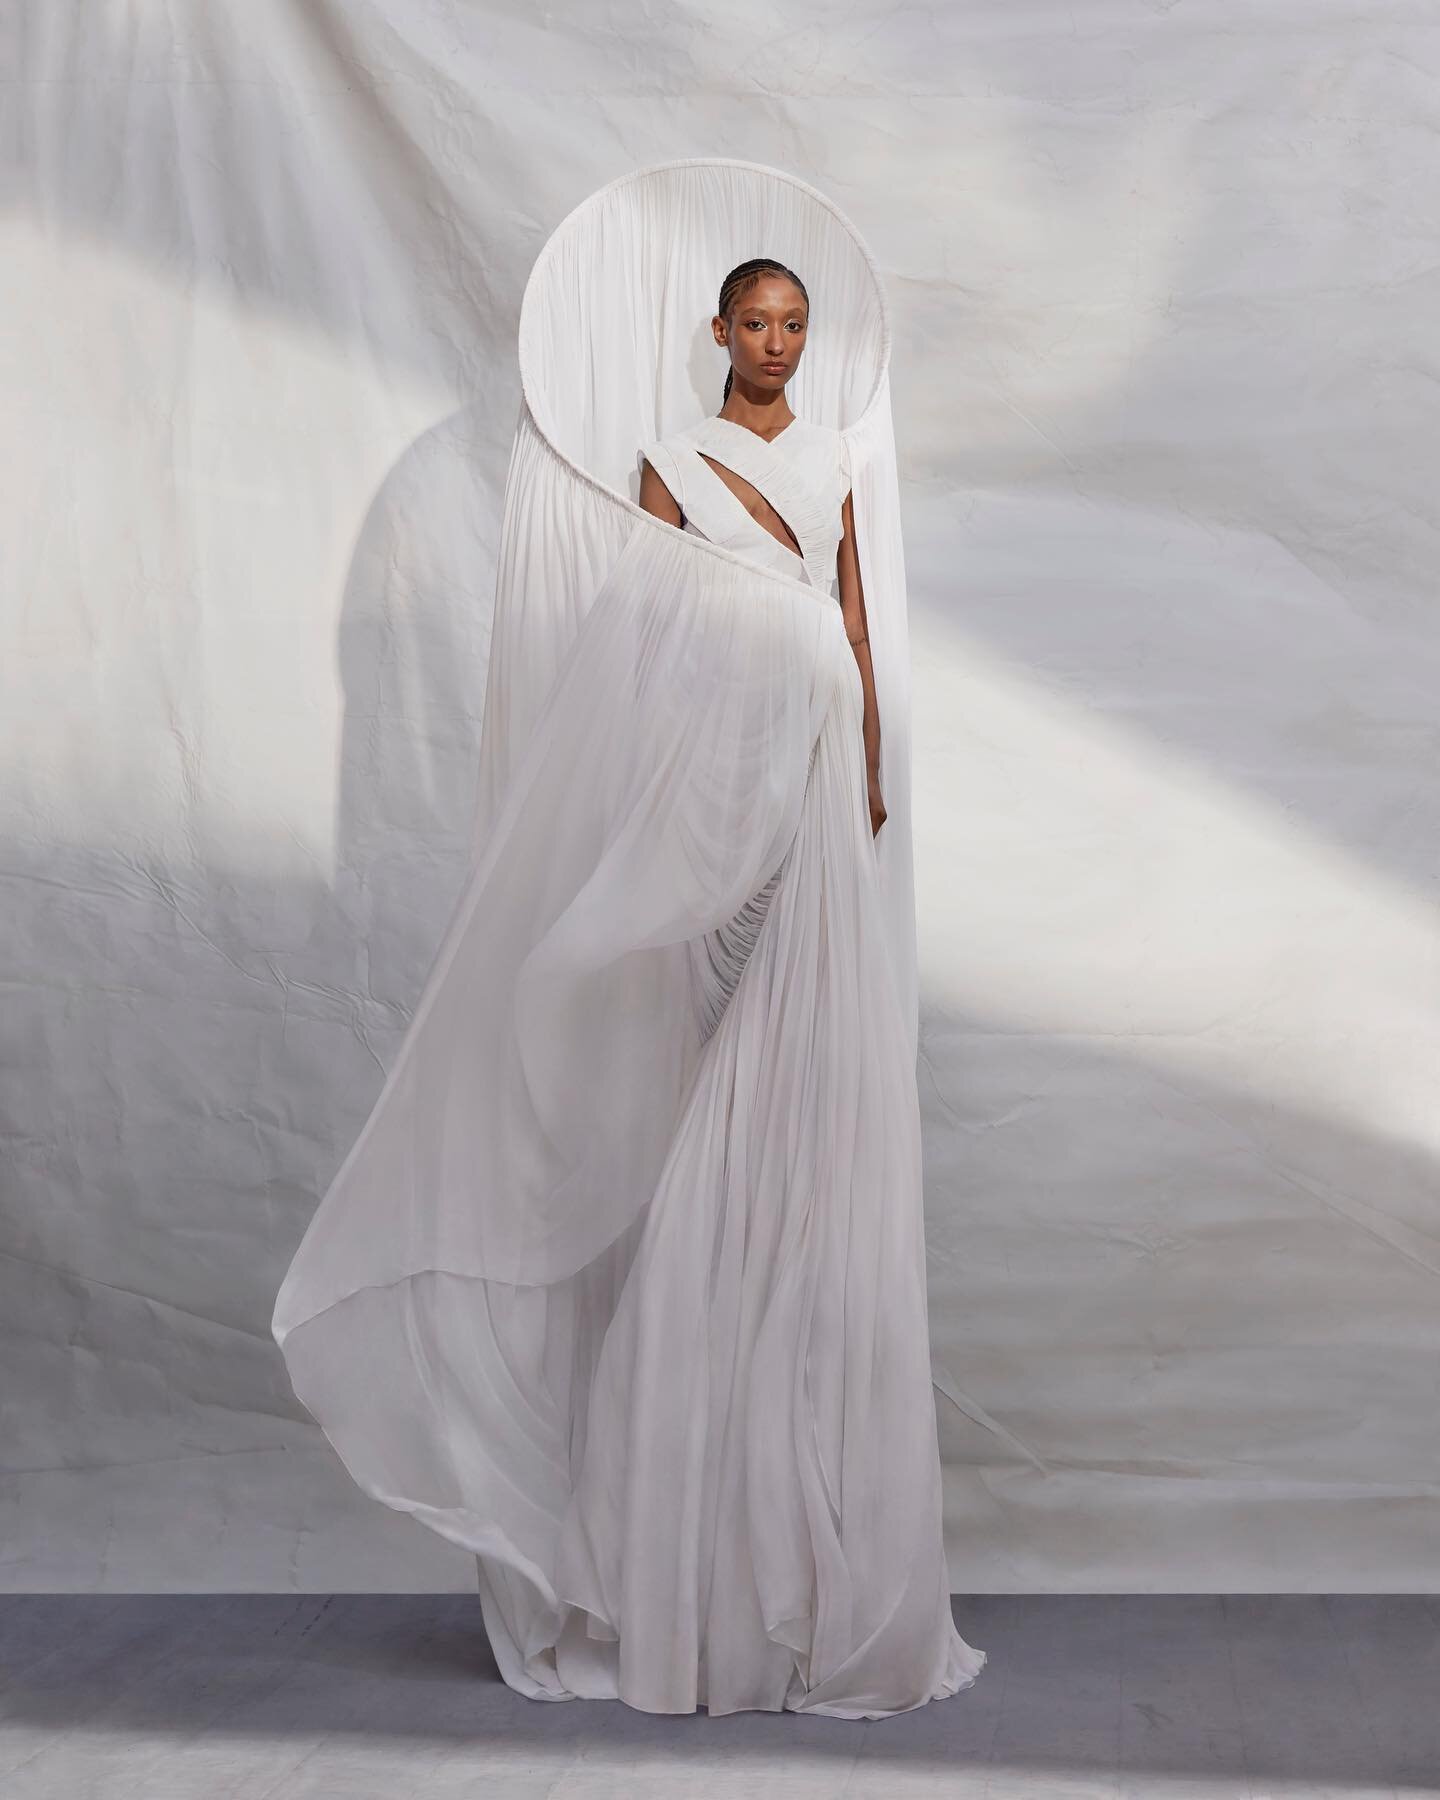 The Anemoi Dress 🌫🌫🌫

The final look of WINDFARBE on Kitan made from 20 meters of cruelty-free silk and dead stock fabric ⚔️

Thank you to @theperfectmagazine the team: 
Talent: @kitan.sogo @imgmodels 
Makeup: @kyledominicc 
MUA assitant: @craigha